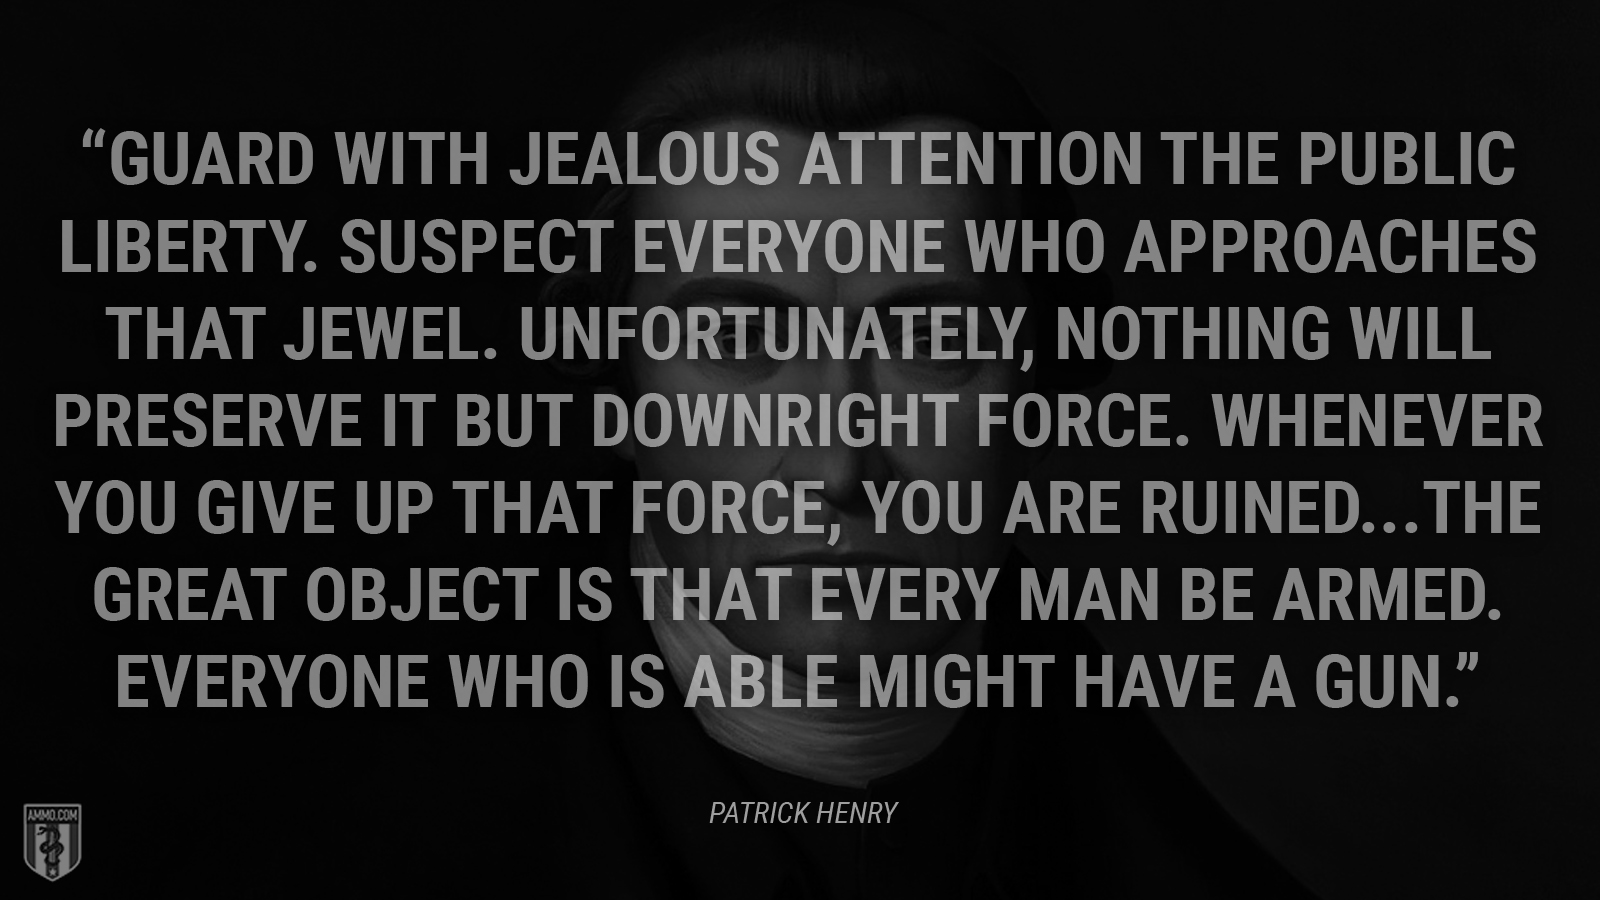 “Guard with jealous attention the public liberty. Suspect everyone who approaches that jewel. Unfortunately, nothing will preserve it but downright force. Whenever you give up that force, you are ruined...The great object is that every man be armed. Everyone who is able might have a gun.” - Patrick Henry